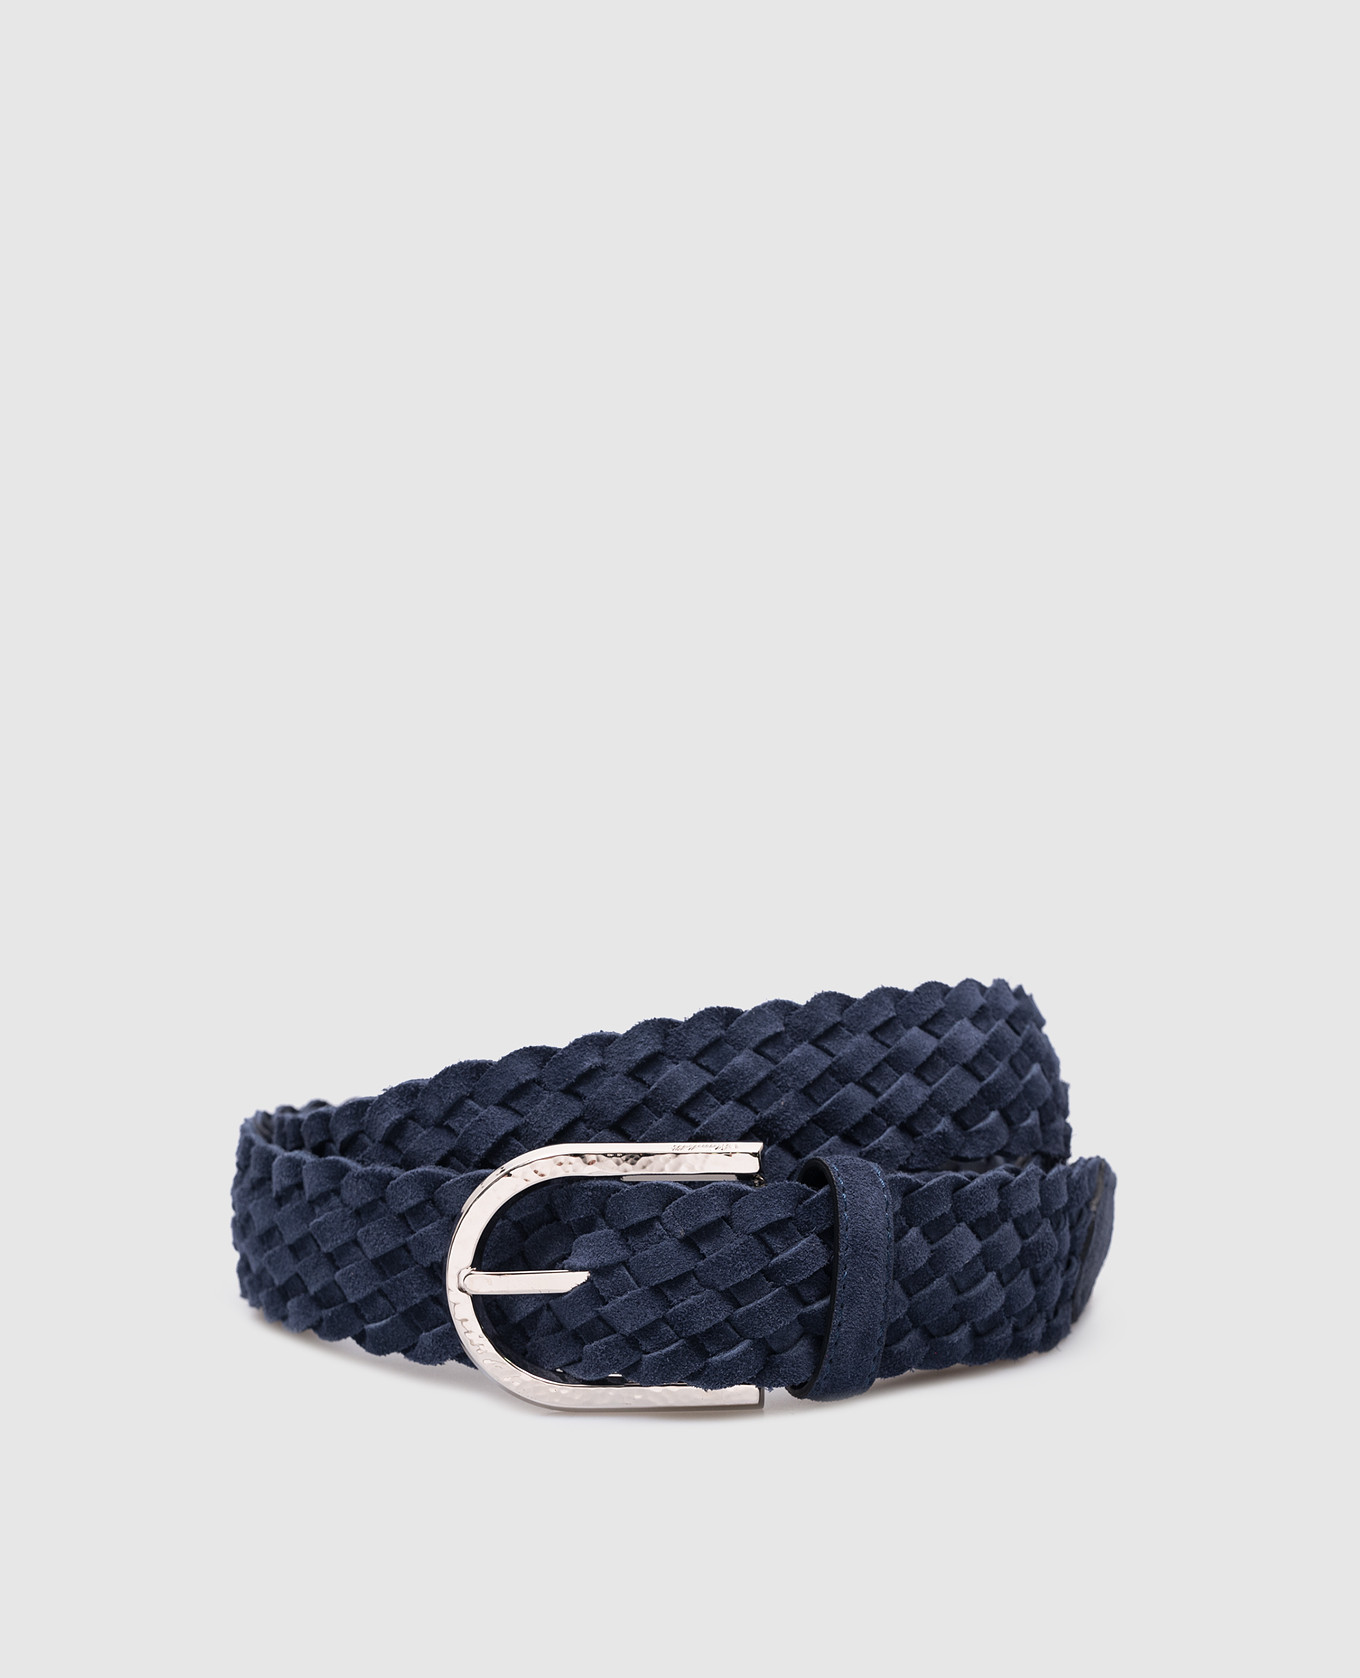 Blue suede belt with weaving